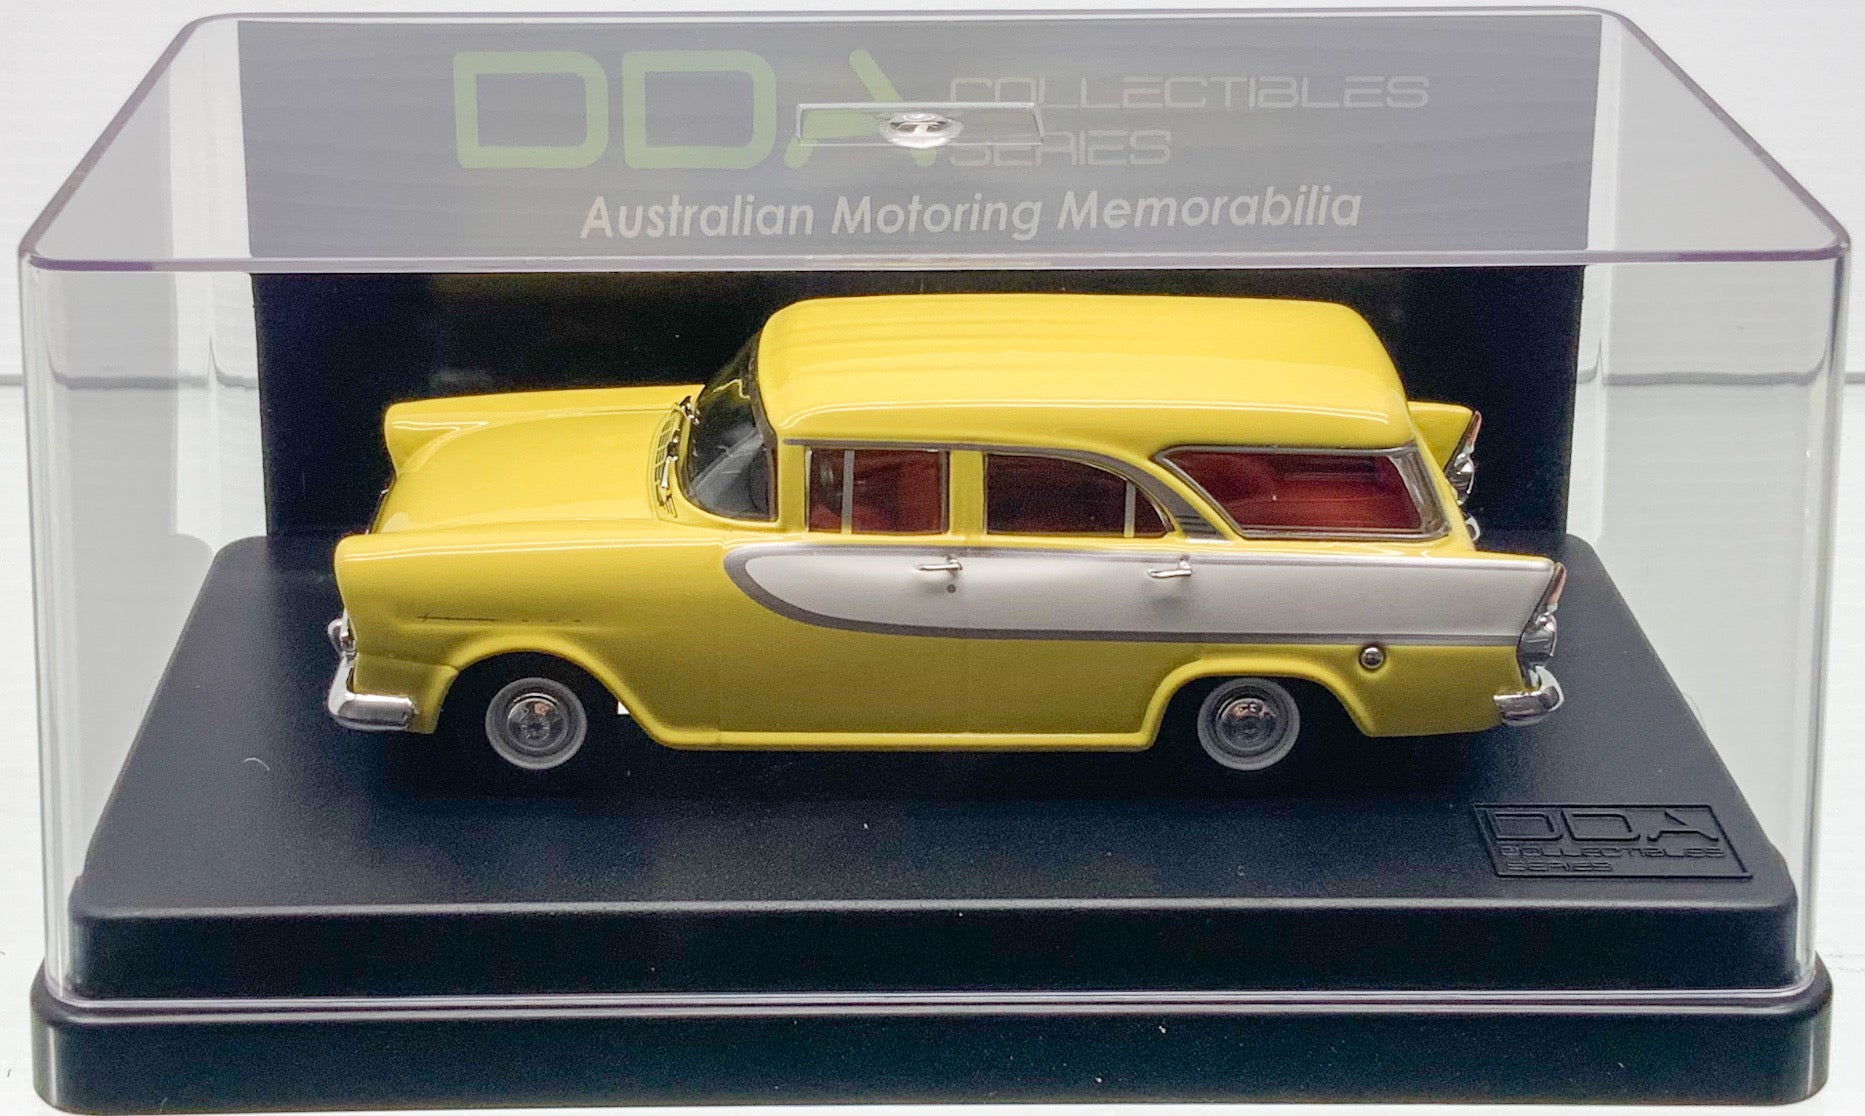 "Scale model of a Holden FB Station Wagon in Yellow/White by DDA Collectibles, scaled at 1:43. Shop now at tatoyshop.com for shipping to selected countries and within Australia."